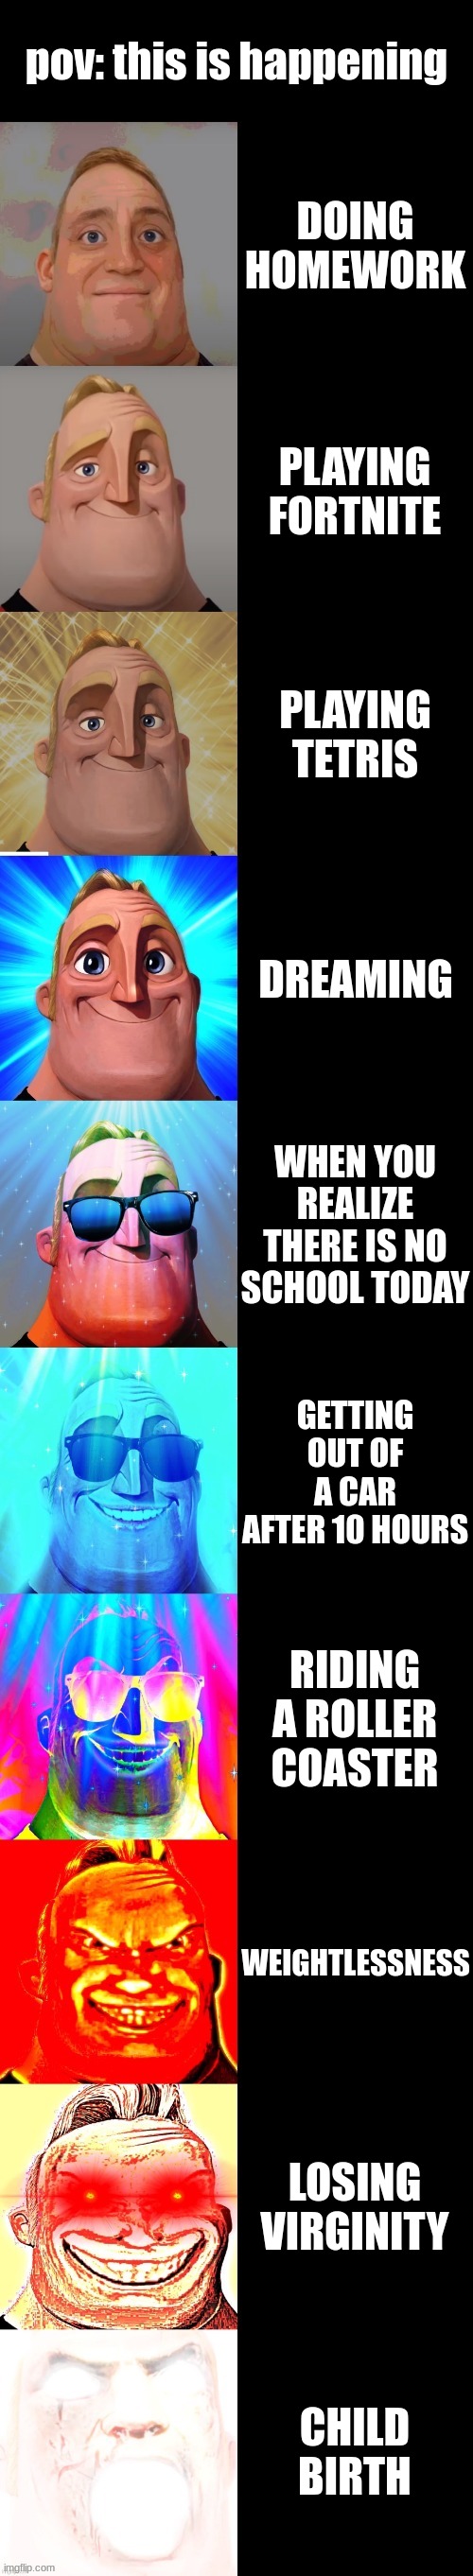 the best feeling | pov: this is happening; DOING HOMEWORK; PLAYING FORTNITE; PLAYING TETRIS; DREAMING; WHEN YOU REALIZE THERE IS NO SCHOOL TODAY; GETTING OUT OF A CAR AFTER 10 HOURS; RIDING A ROLLER COASTER; WEIGHTLESSNESS; LOSING VIRGINITY; CHILD BIRTH | image tagged in mr incredible becoming canny | made w/ Imgflip meme maker